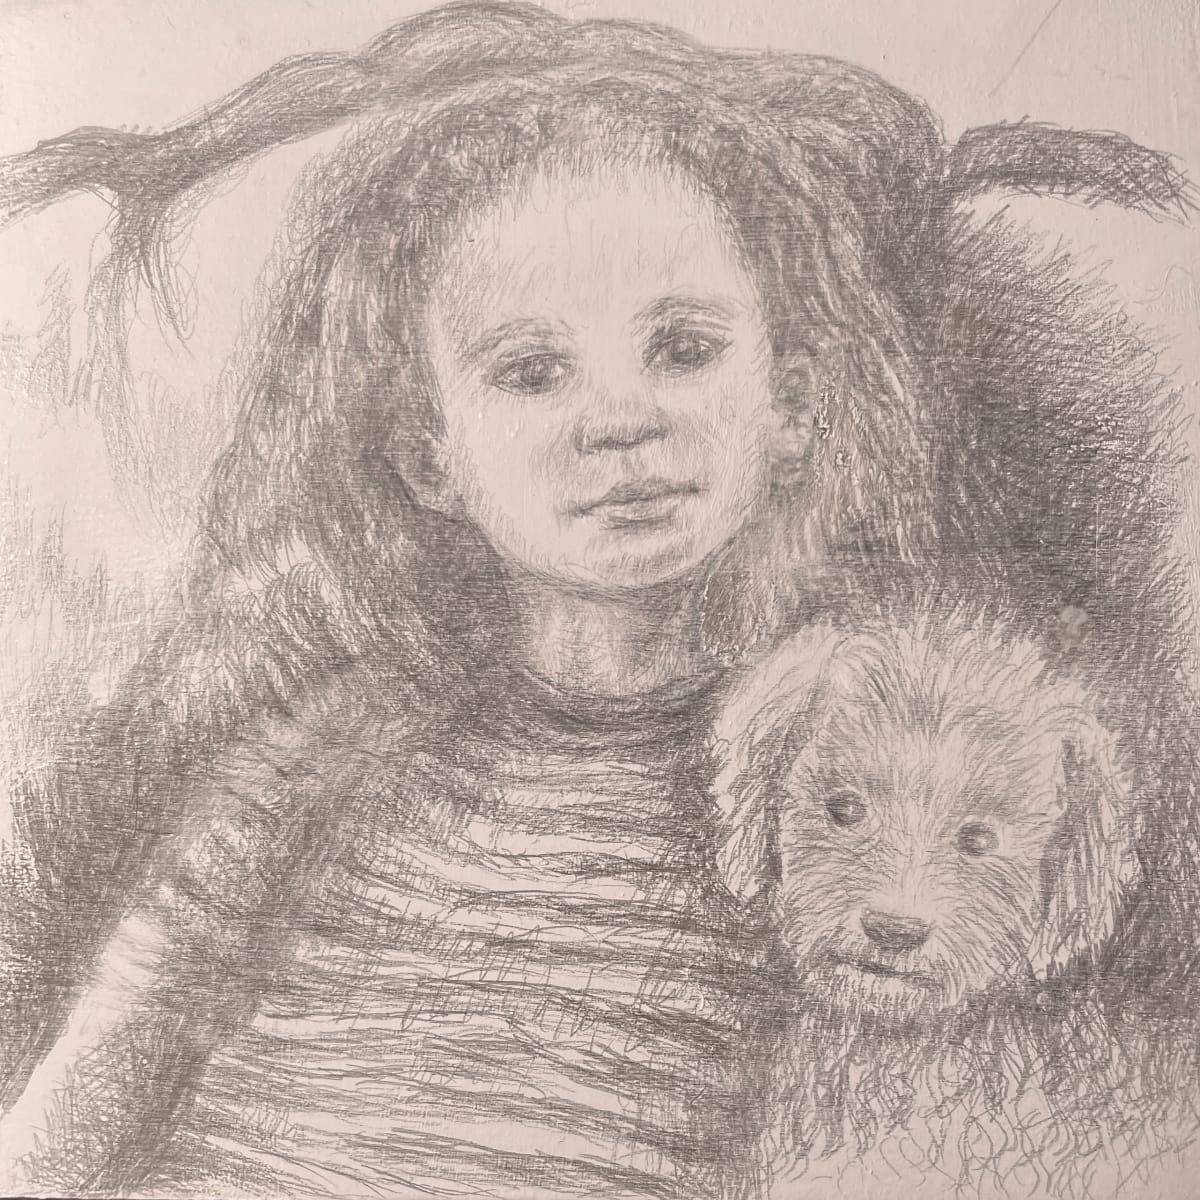 My Bestie by Susan Silvester  Image: This series of silverpoint portraits merges the ancient art technique with contemporary themes, showcasing children and their modern toys or pets to reflect on the evolving nature of play and companionship. The use of silverpoint lends a timeless quality to these intimate depictions, emphasizing the deep connections between the subjects and their chosen companions, whether organic or engineered. Through this juxtaposition, the series invites viewers to contemplate the impact of technology on childhood and the fundamental nature of friendship